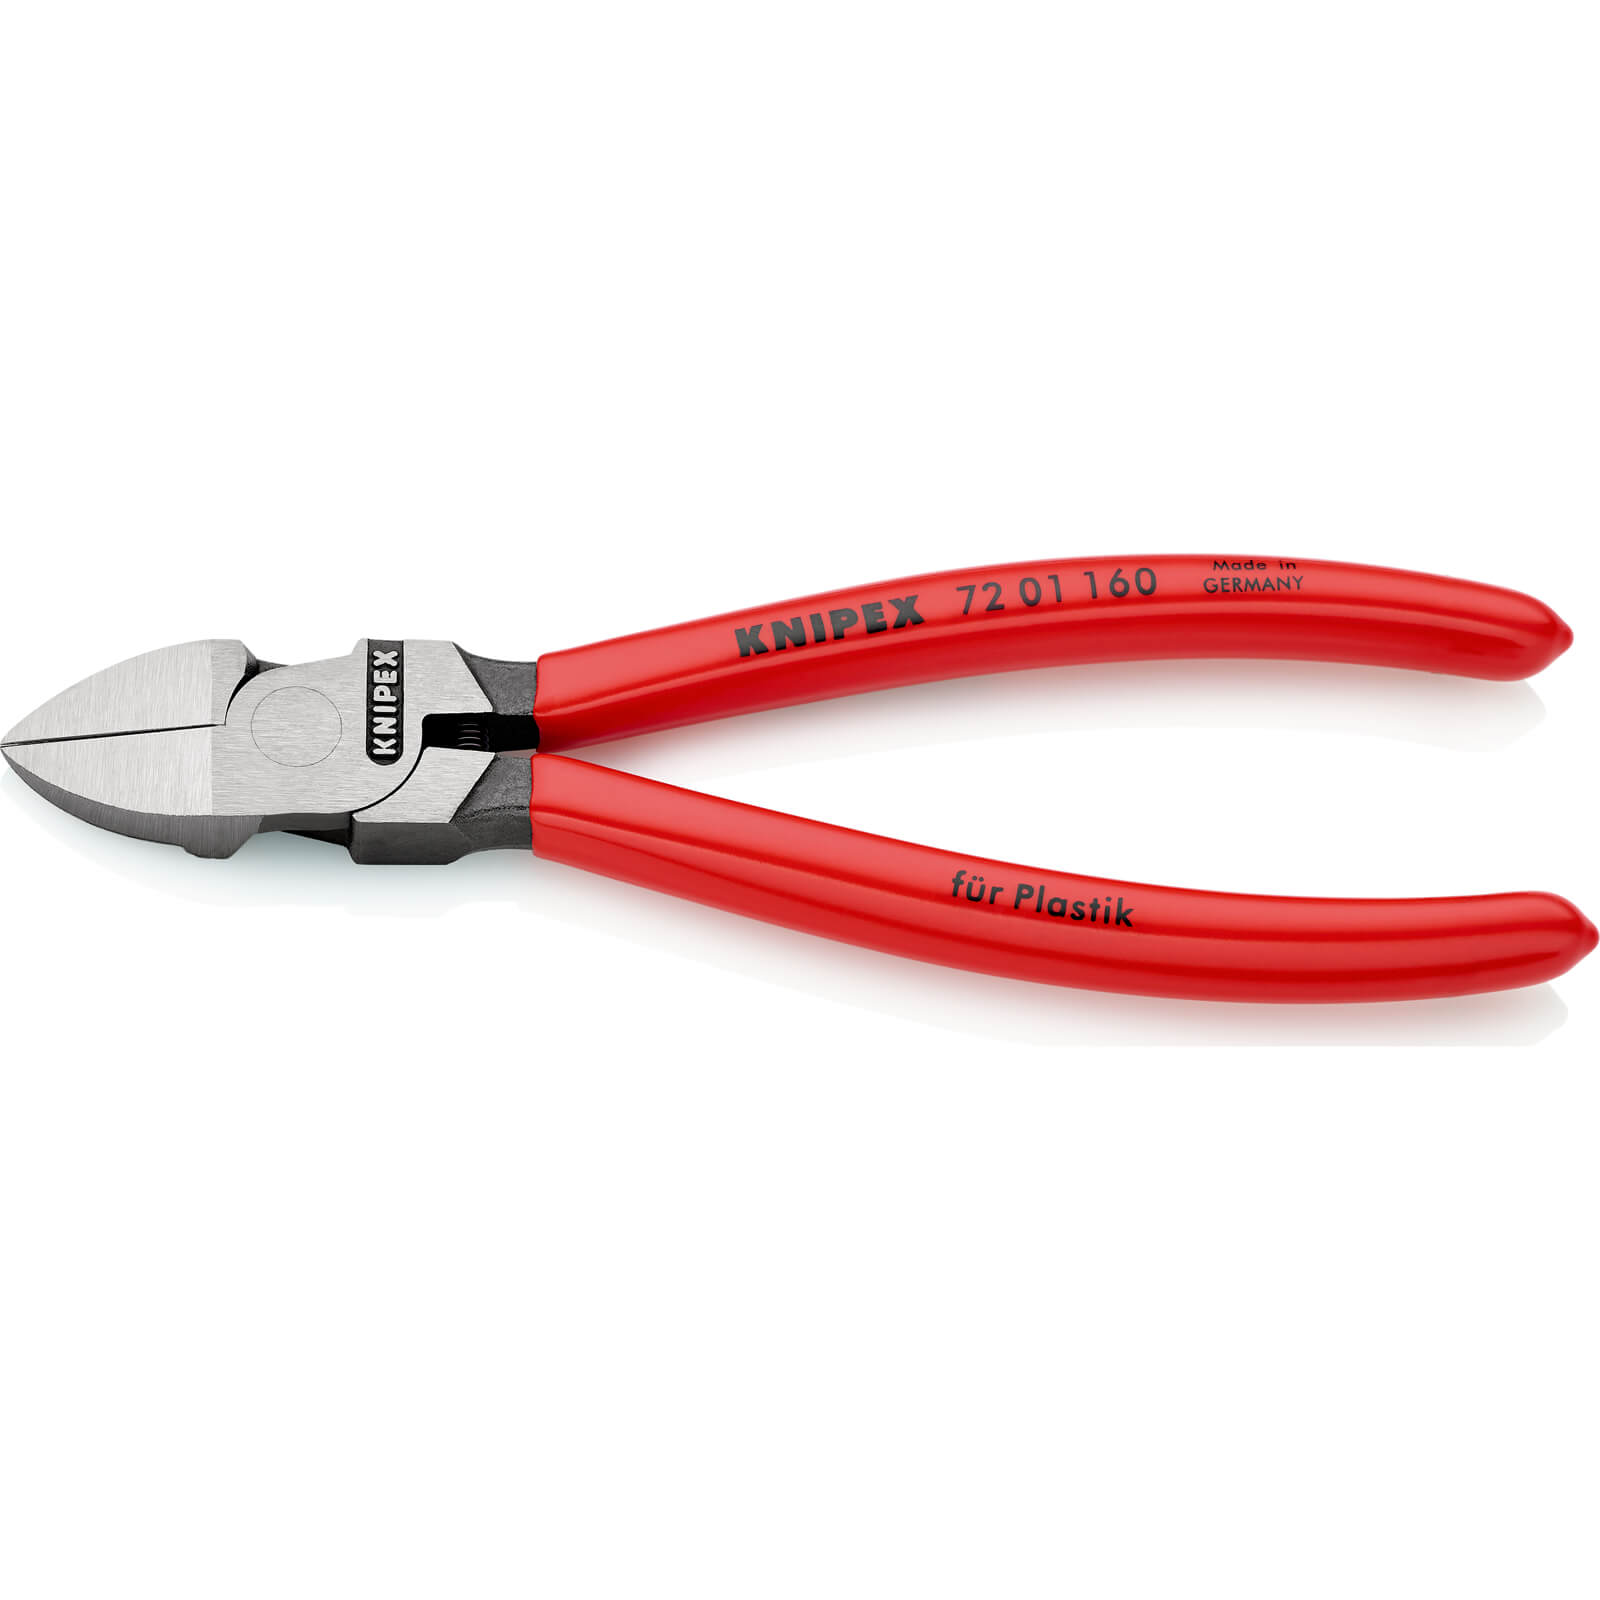 Image of Knipex 72 01 Diagonal Cutting Pliers for Plastics 160mm